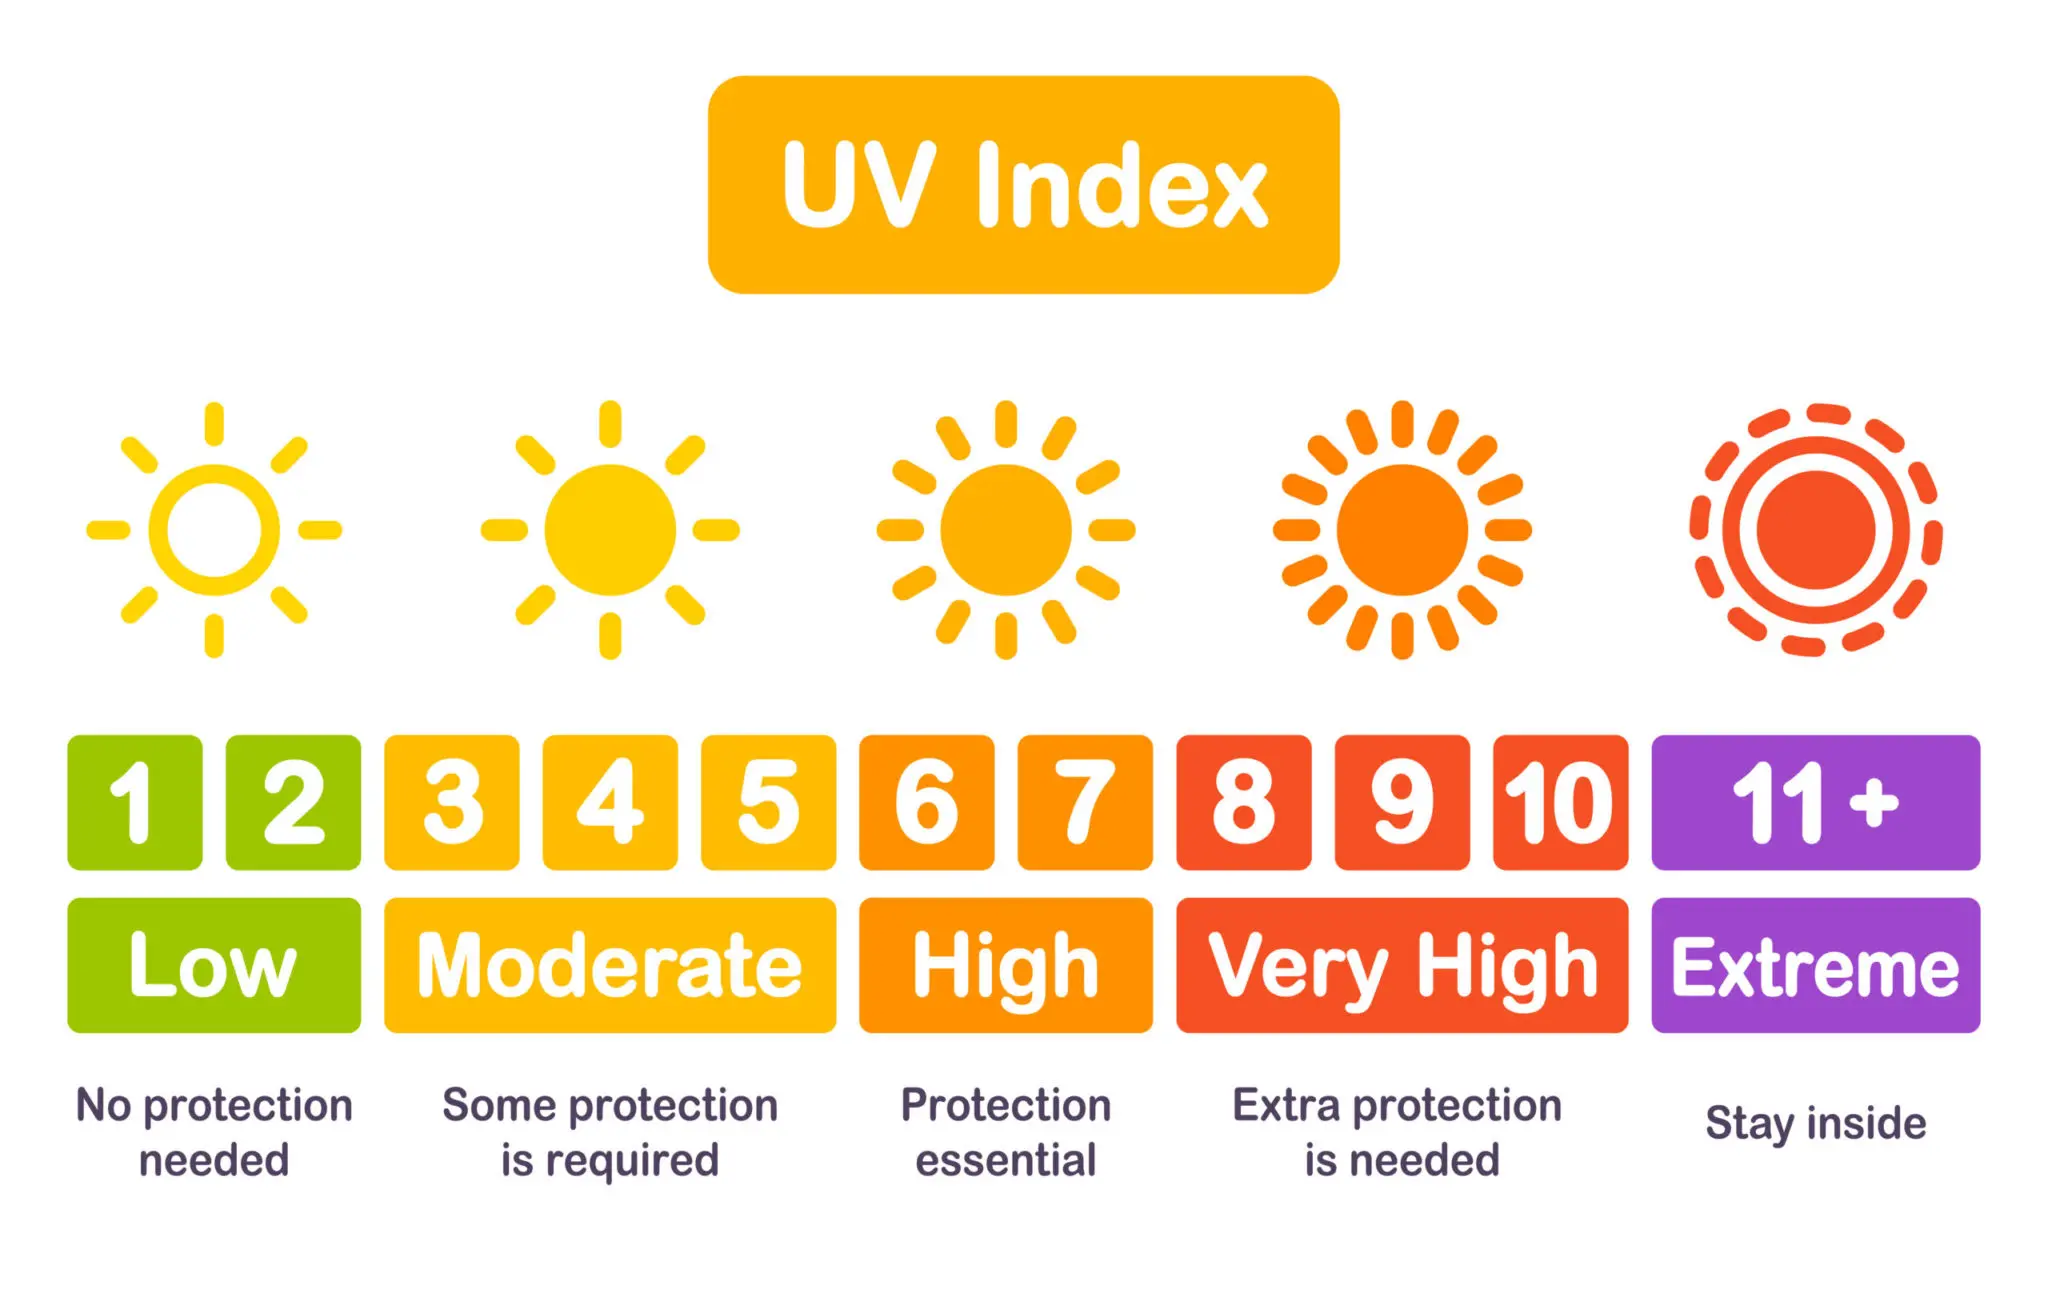 What's the Best Uv to Tan?